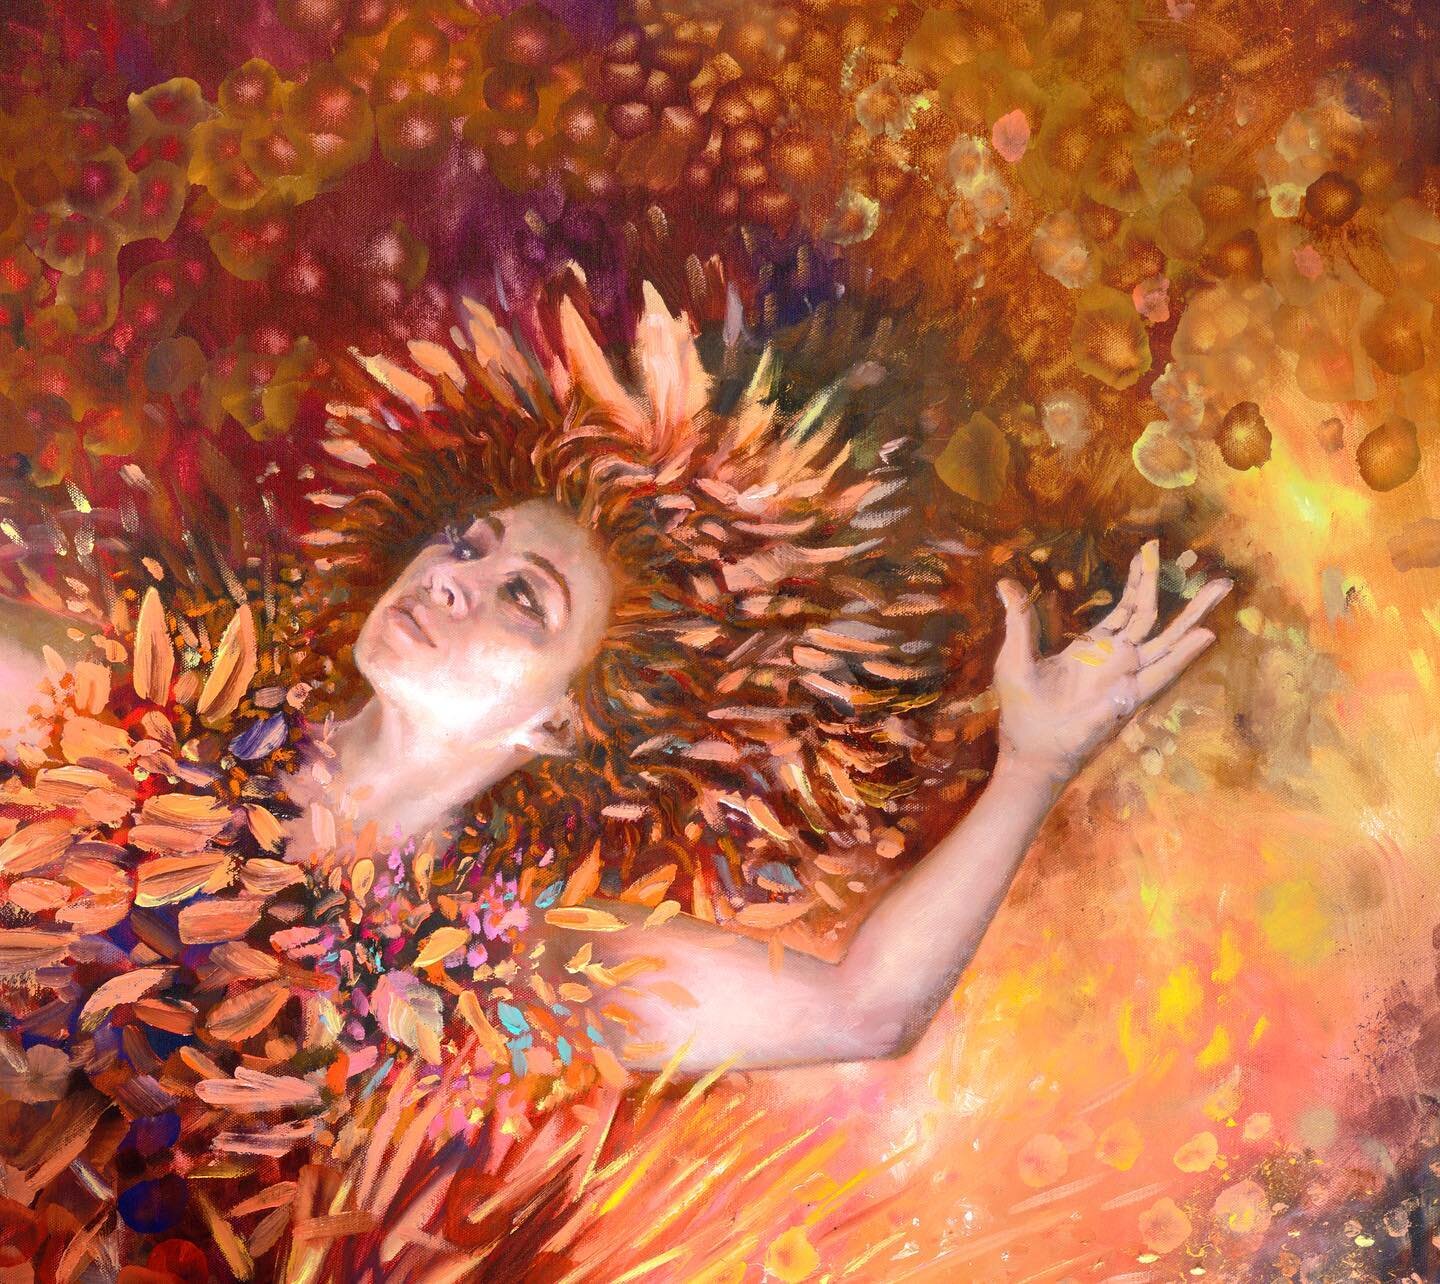 Details and close ups of my new 72x48 inch  #goddess commission. Woohoo!!
Original sold. 

Special thanks to my friend Morika for modeling for this otherworldly #volcano #god. I combined three techniques into this one painting: fingerpainting (bottom